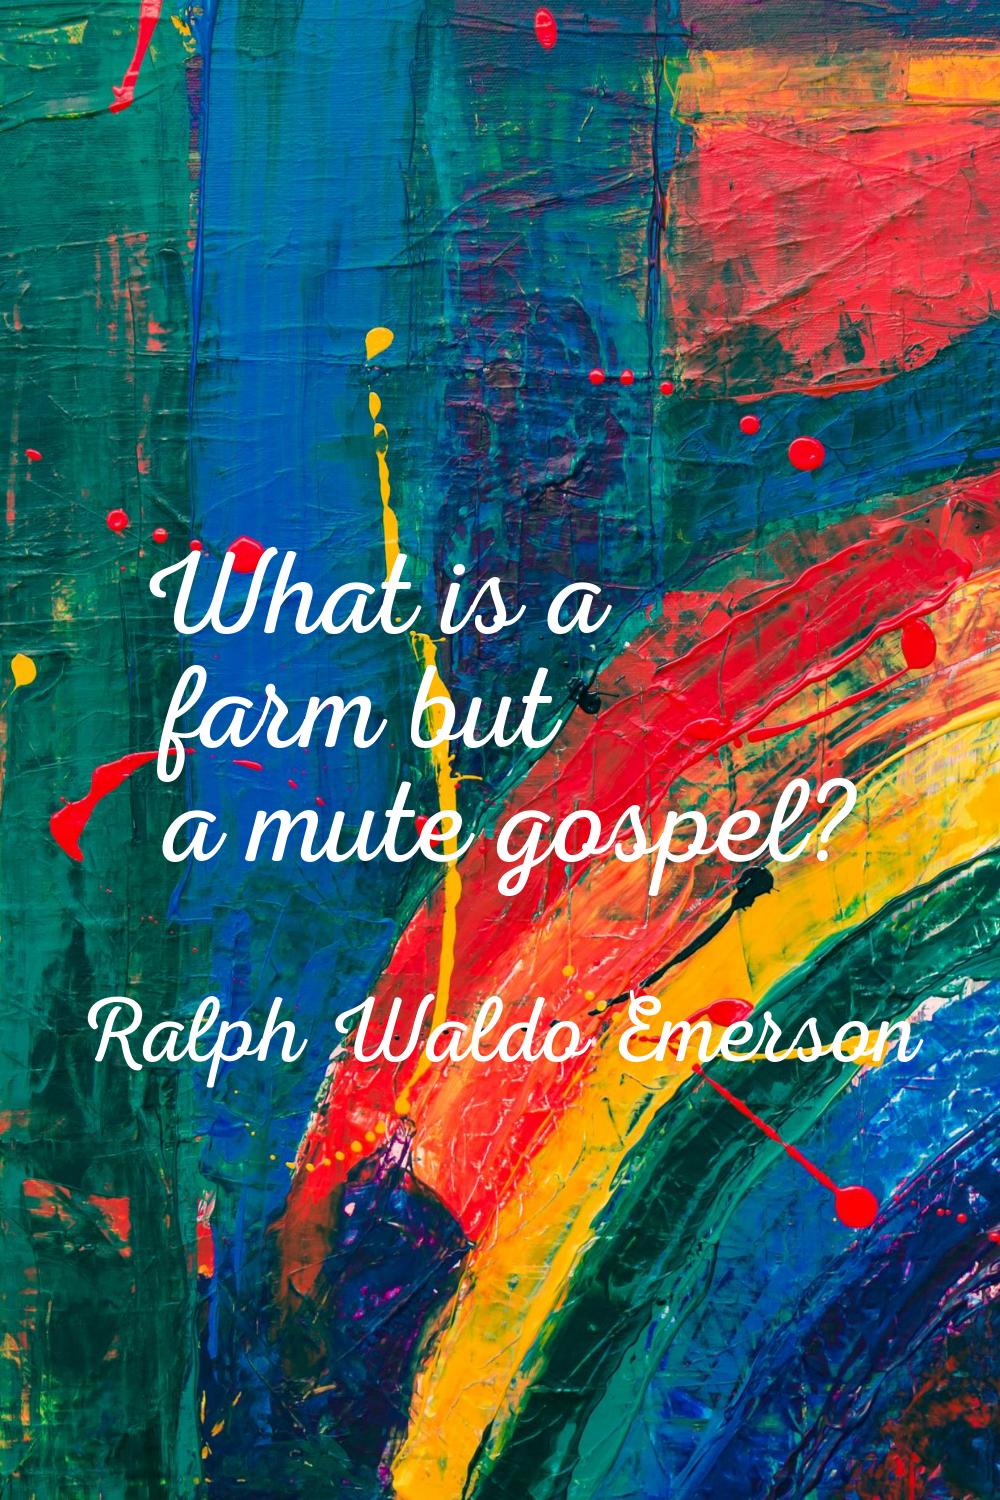 What is a farm but a mute gospel?